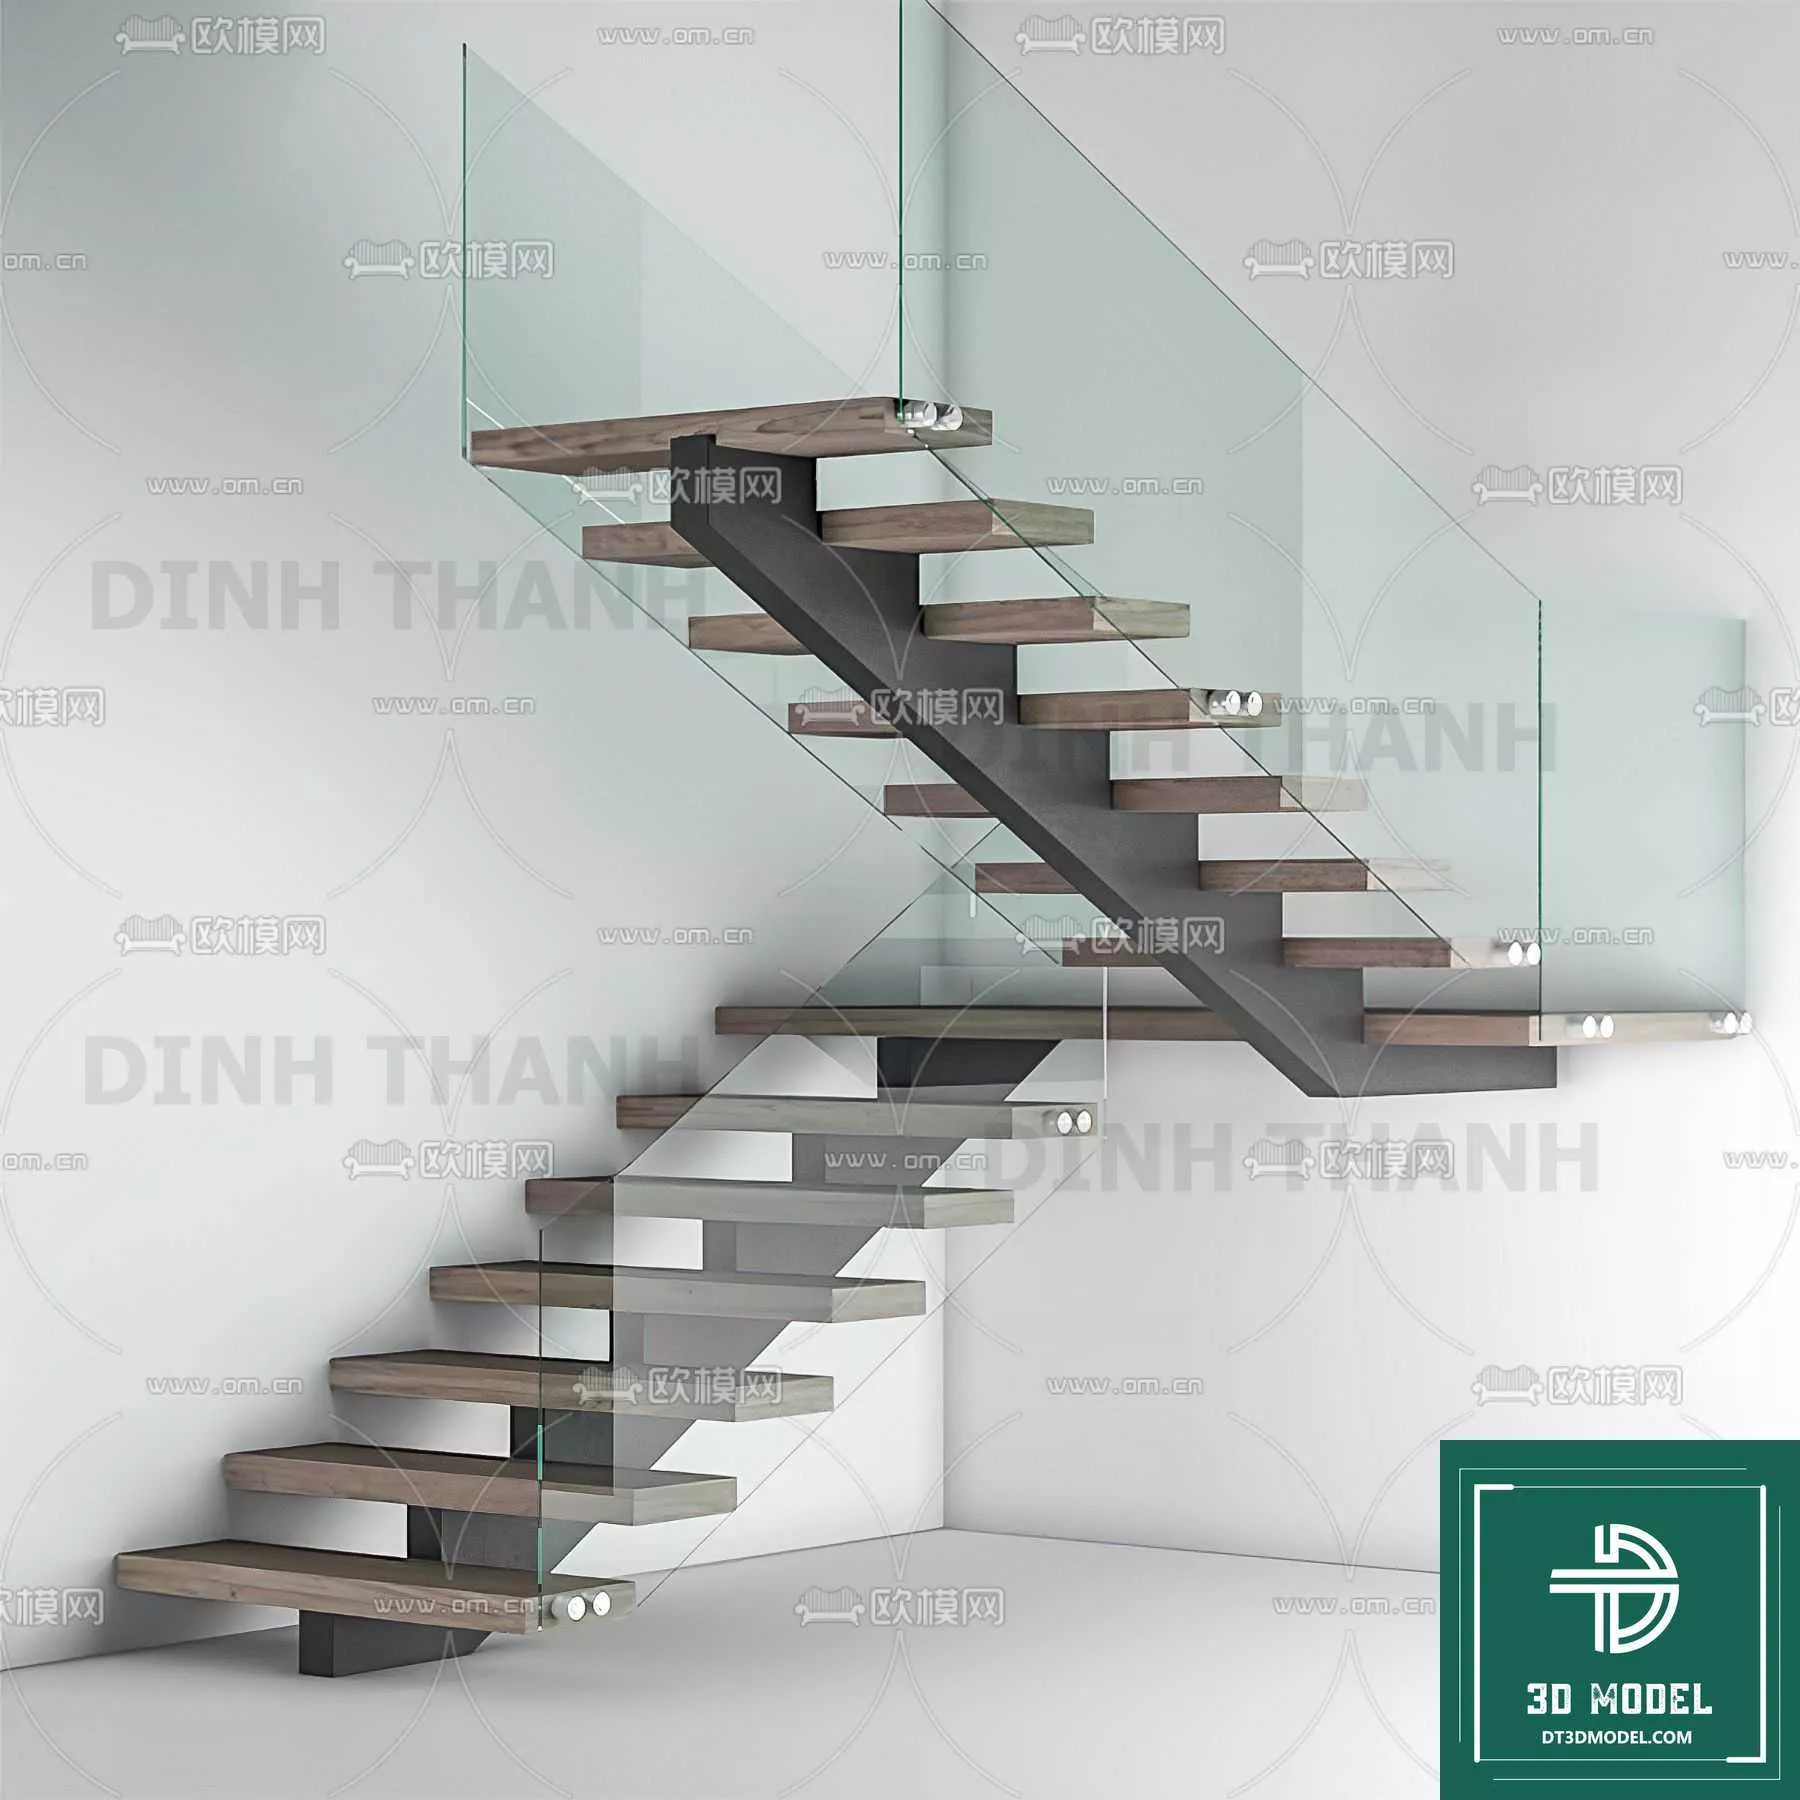 MODERN STAIR - SKETCHUP 3D MODEL - VRAY OR ENSCAPE - ID14305